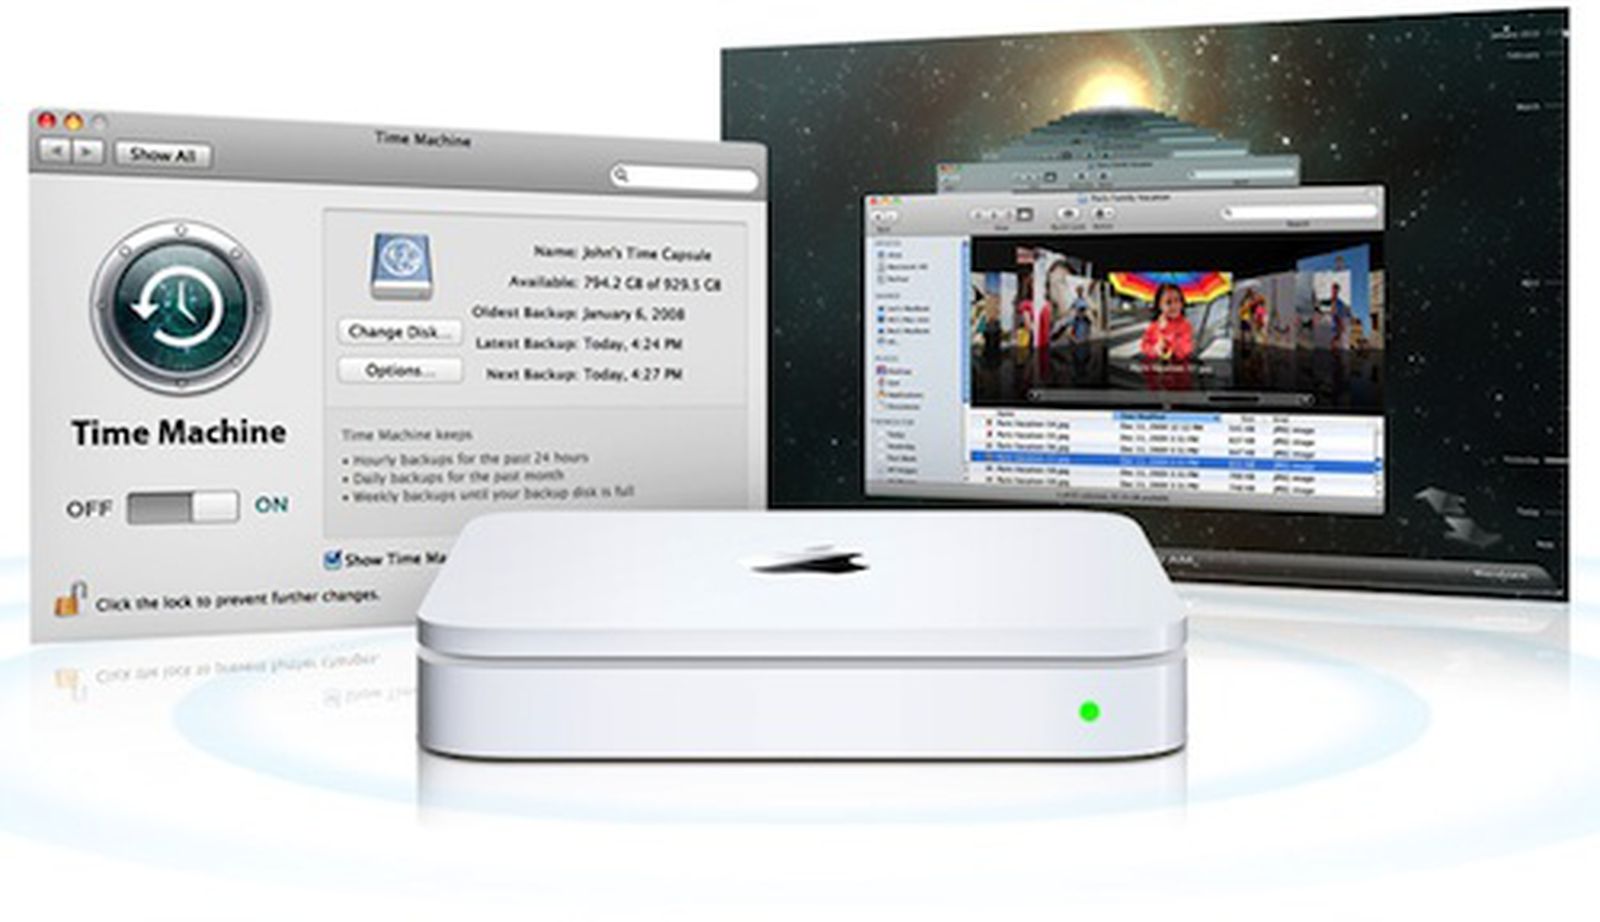 Apple to Launch Cheaper AirPort Extreme, 3TB Time Capsule - MacRumors